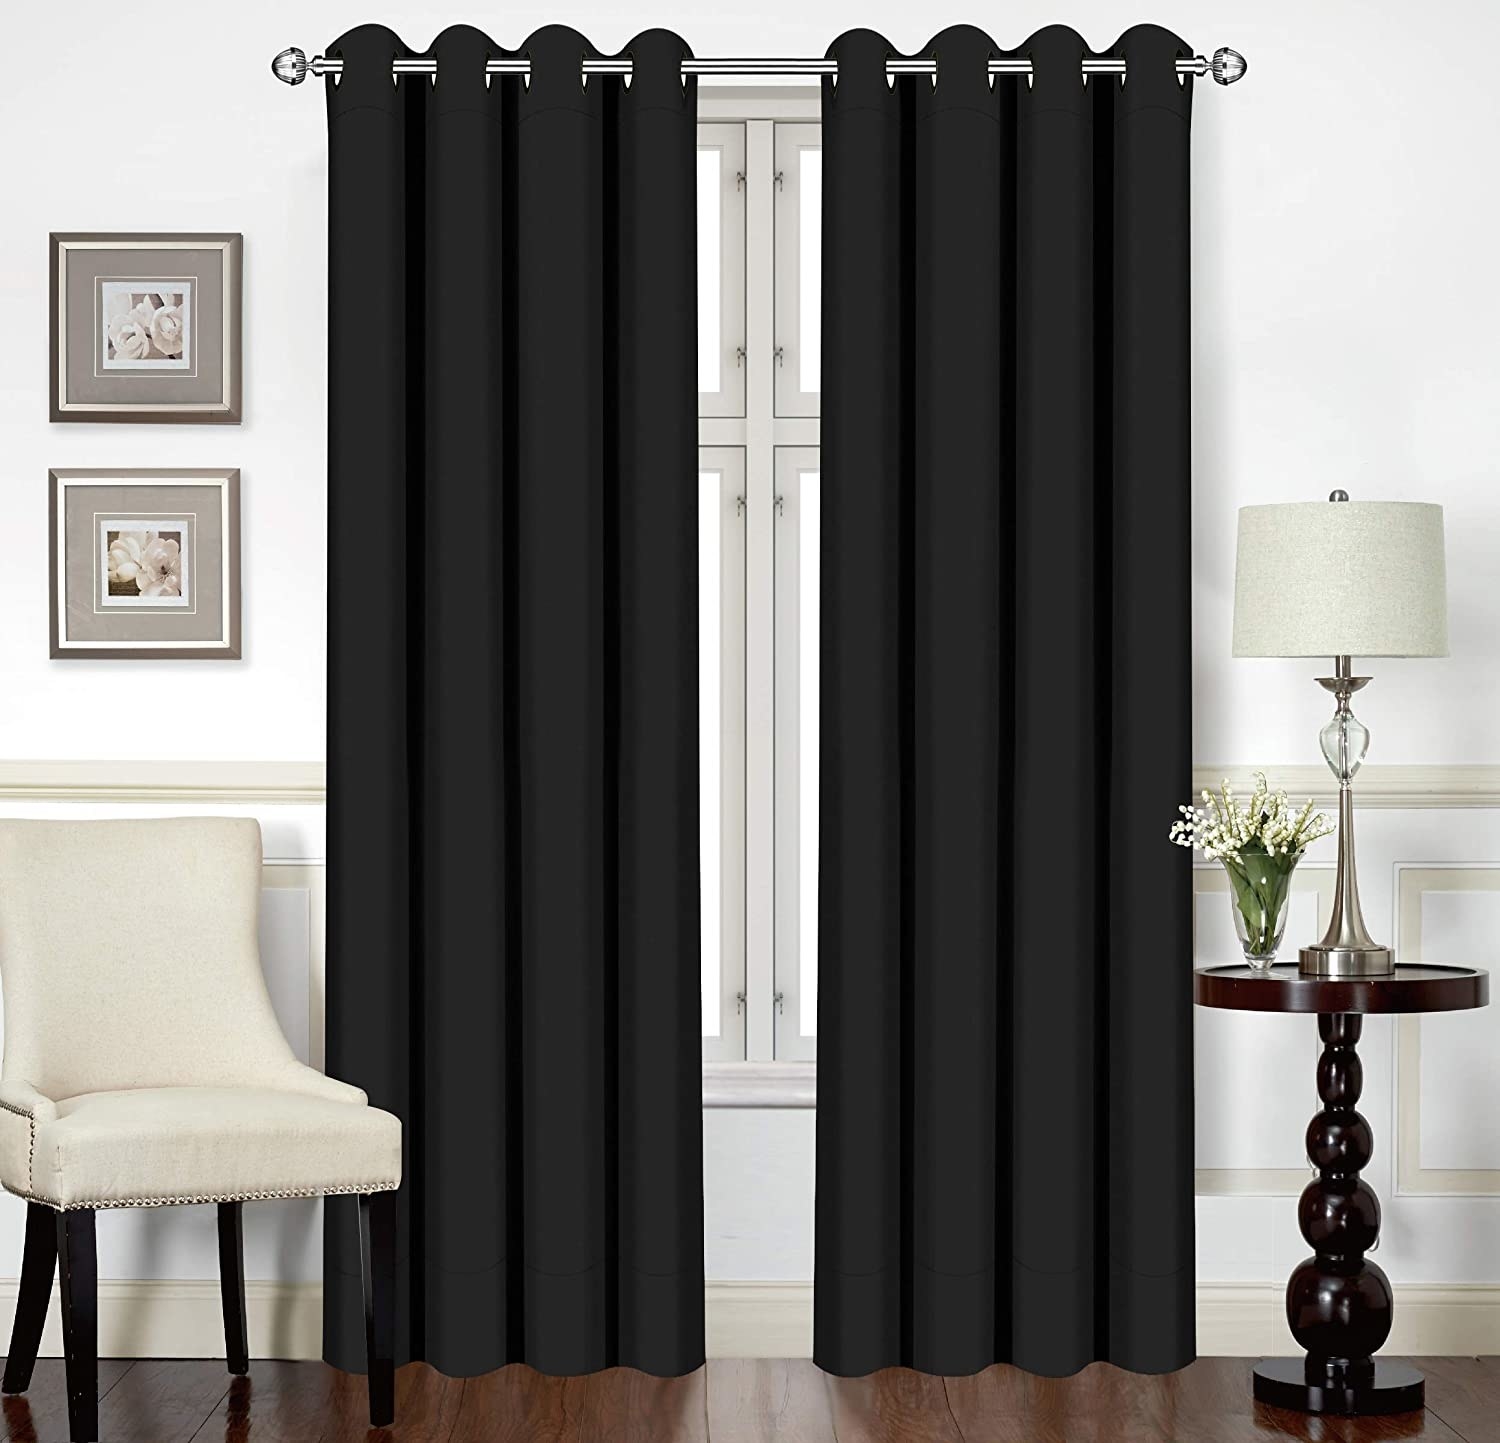 a pair of curtains covering a window